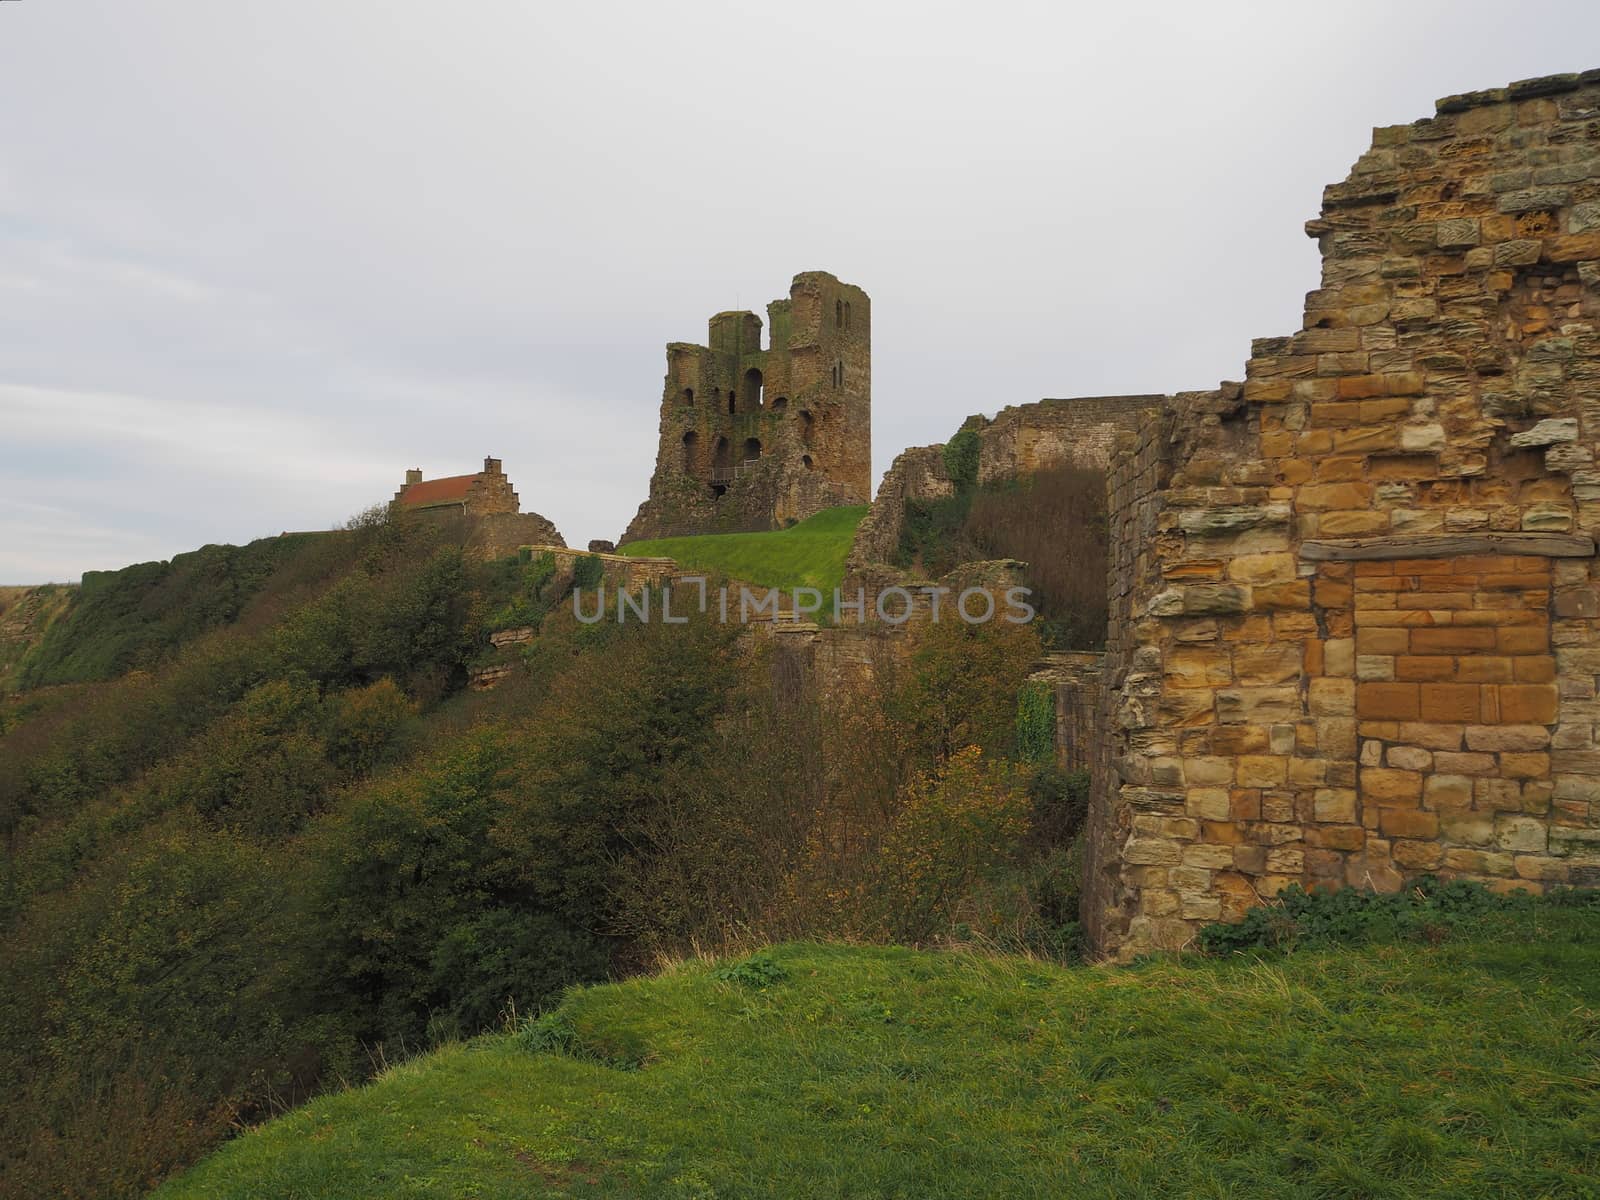 The ruins of Scarborough Castle, Yorkshire, UK